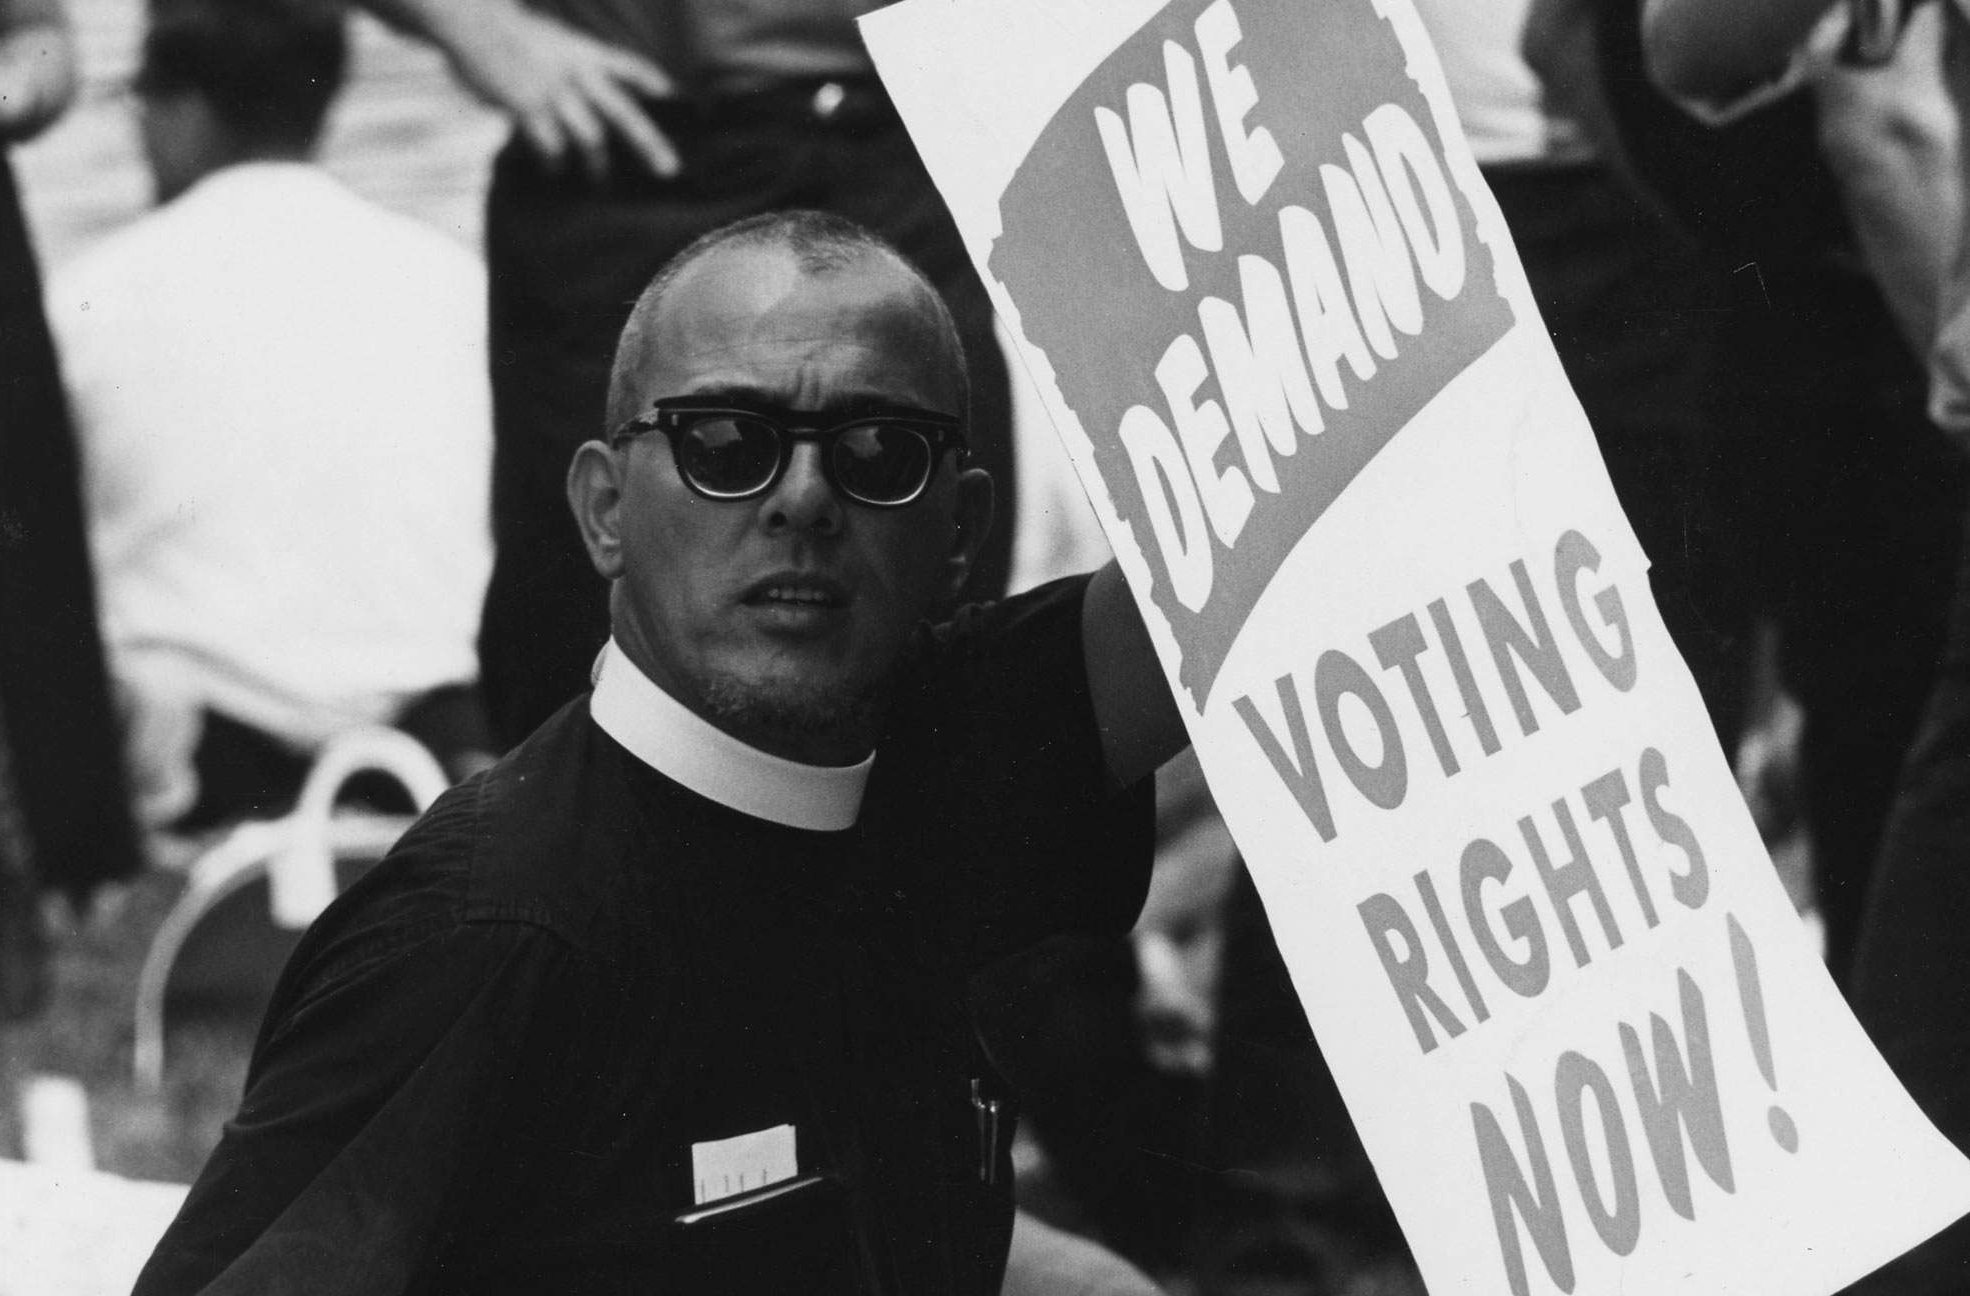 We Demand Voting Rights Now!